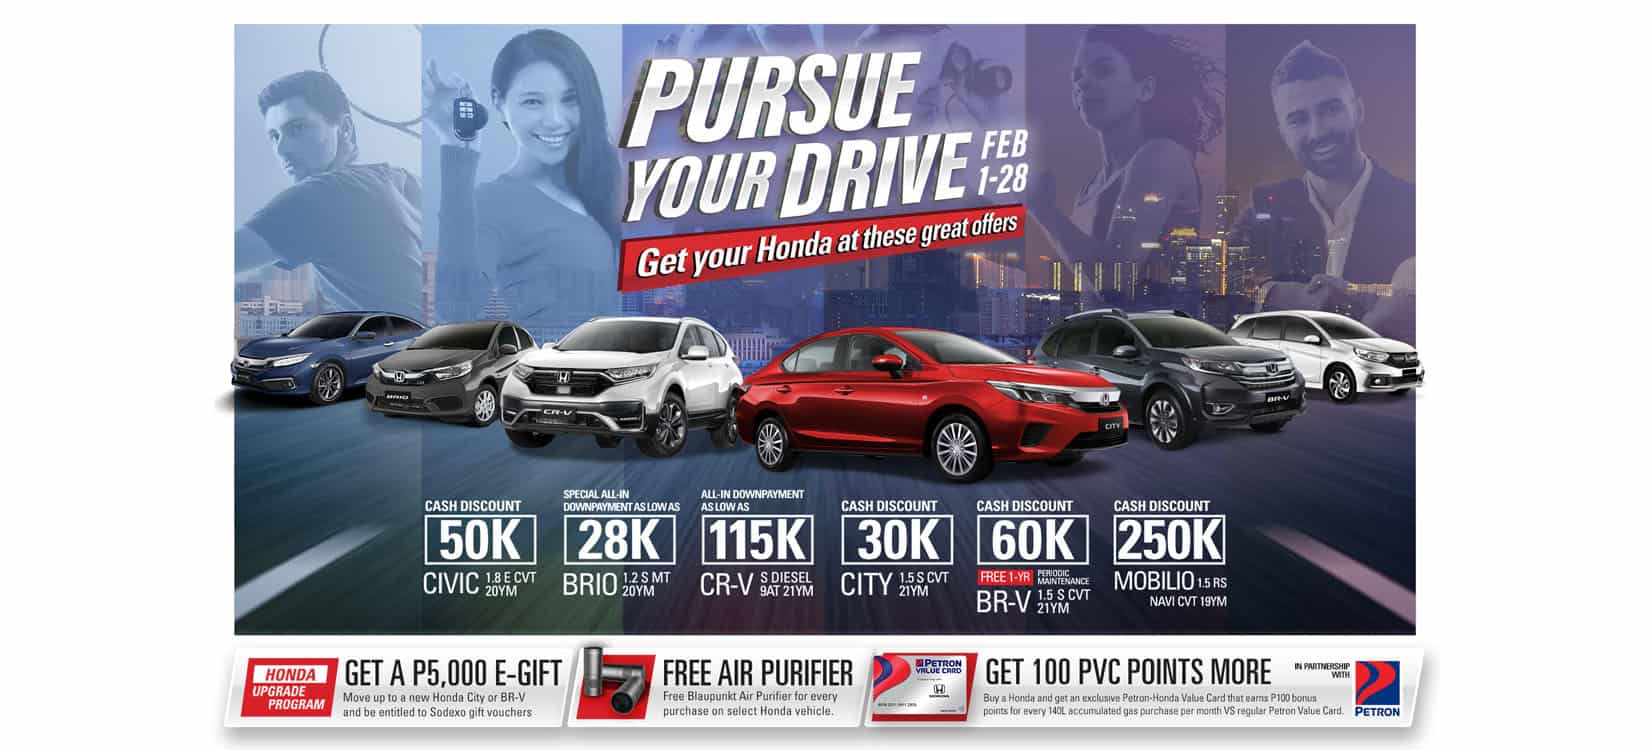 Up to 250K discount for Mobilio and other offers from Honda this February